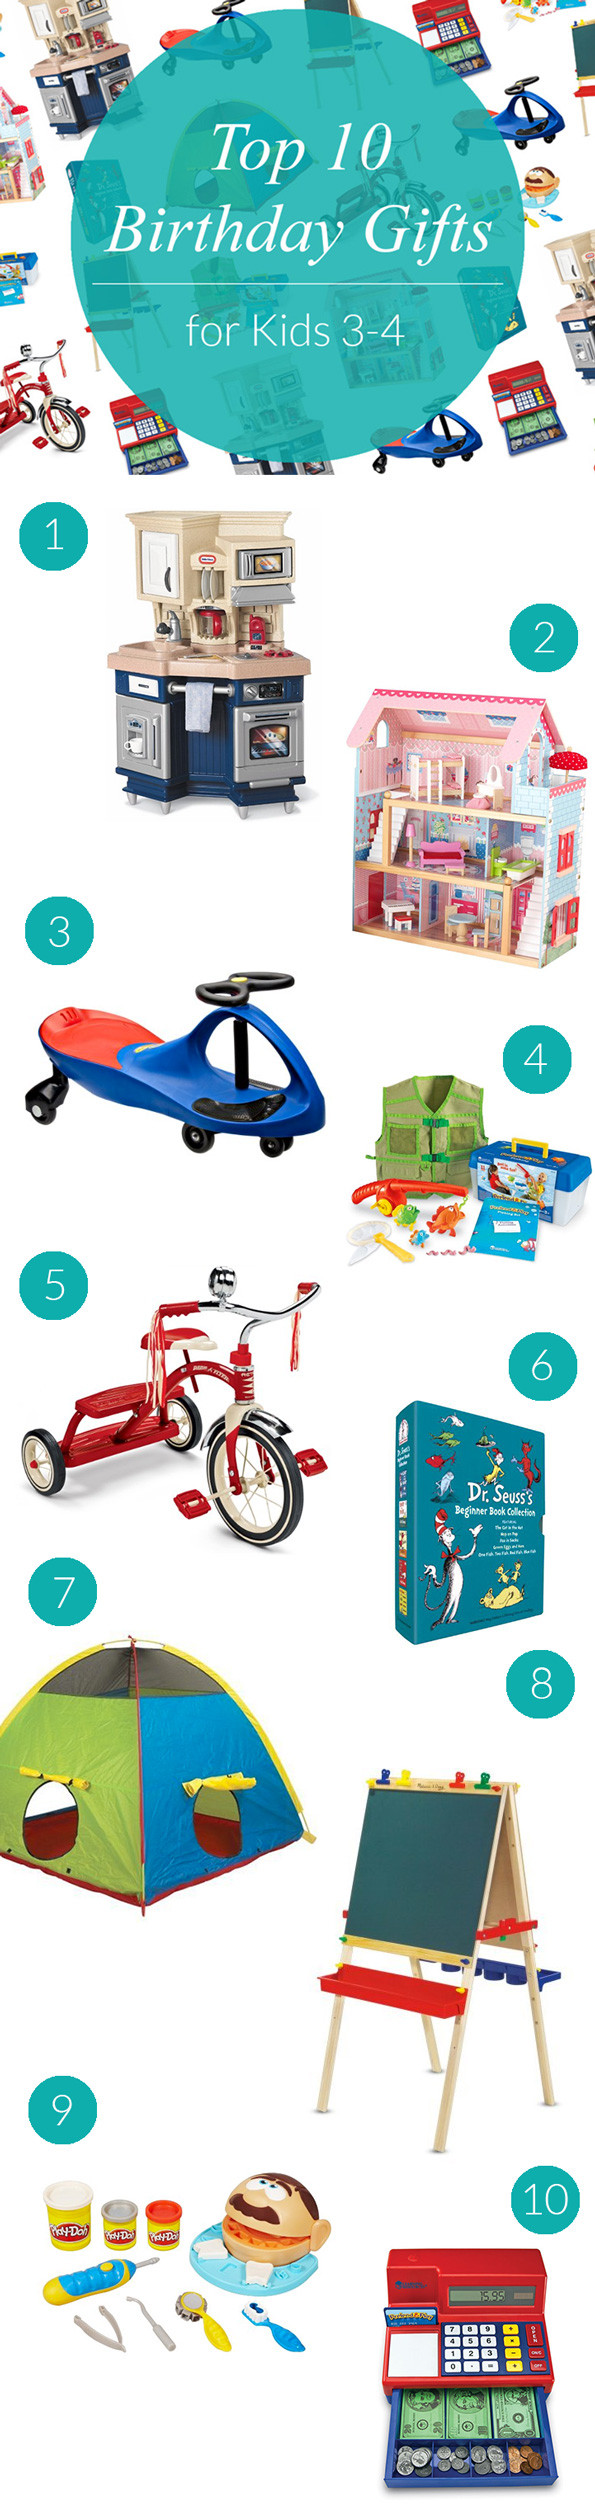 Top 10 Gifts For Children
 Top 10 Birthday Gifts for Kids Ages 3 4 Evite